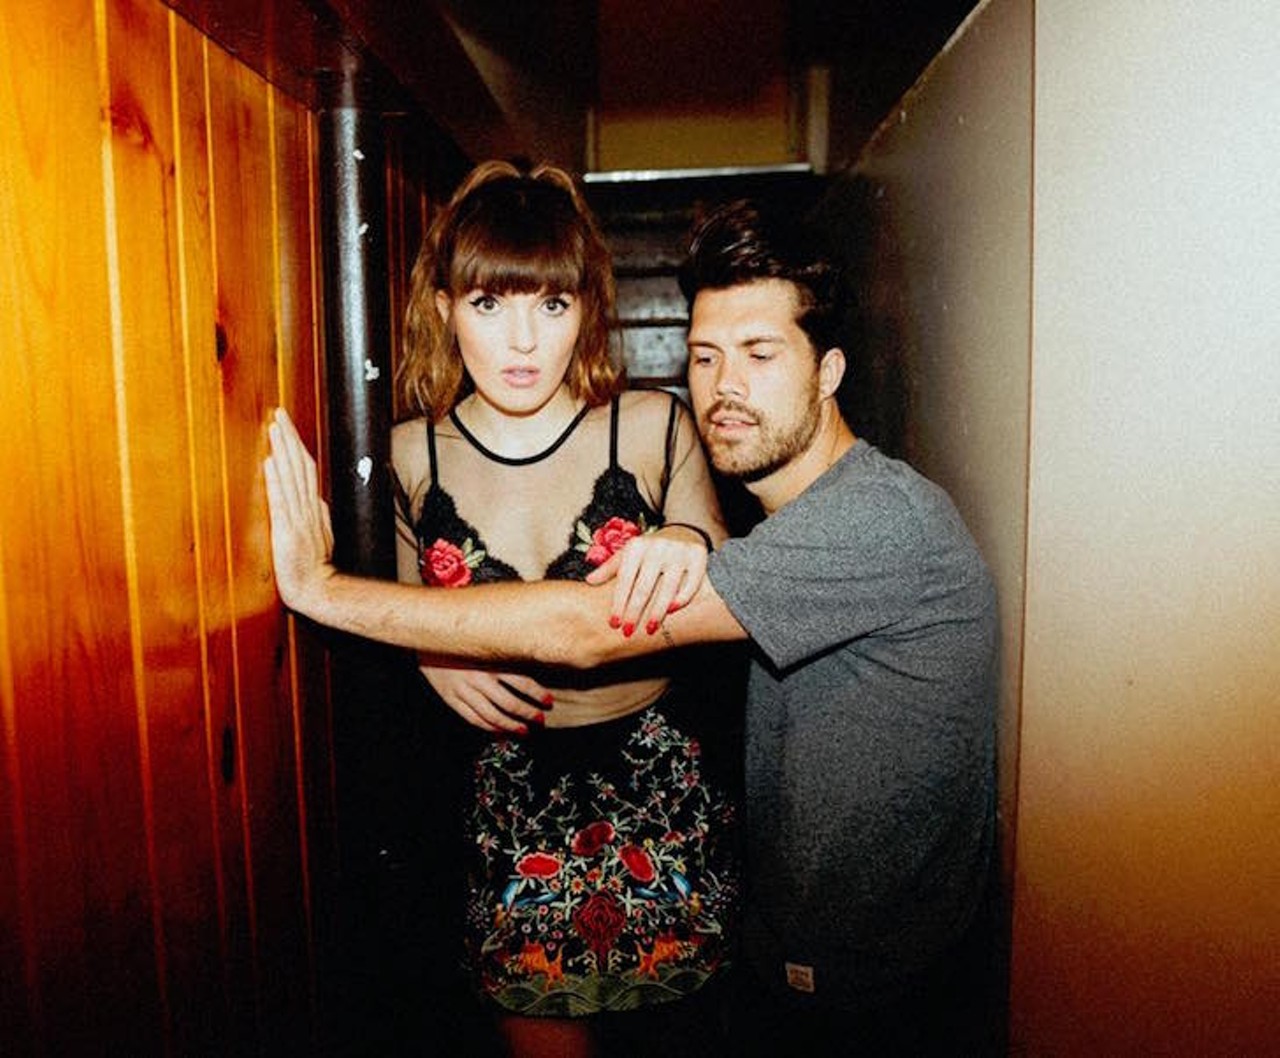 Wednesday, May 16
Oh Wonder U.K. indie-pop duo have hit the big time, but keep their focus squarely on their sweet, catchy music.; 7 p.m. at House of Blues; $25-$29 
Photo via Oh Wonder/Facebook